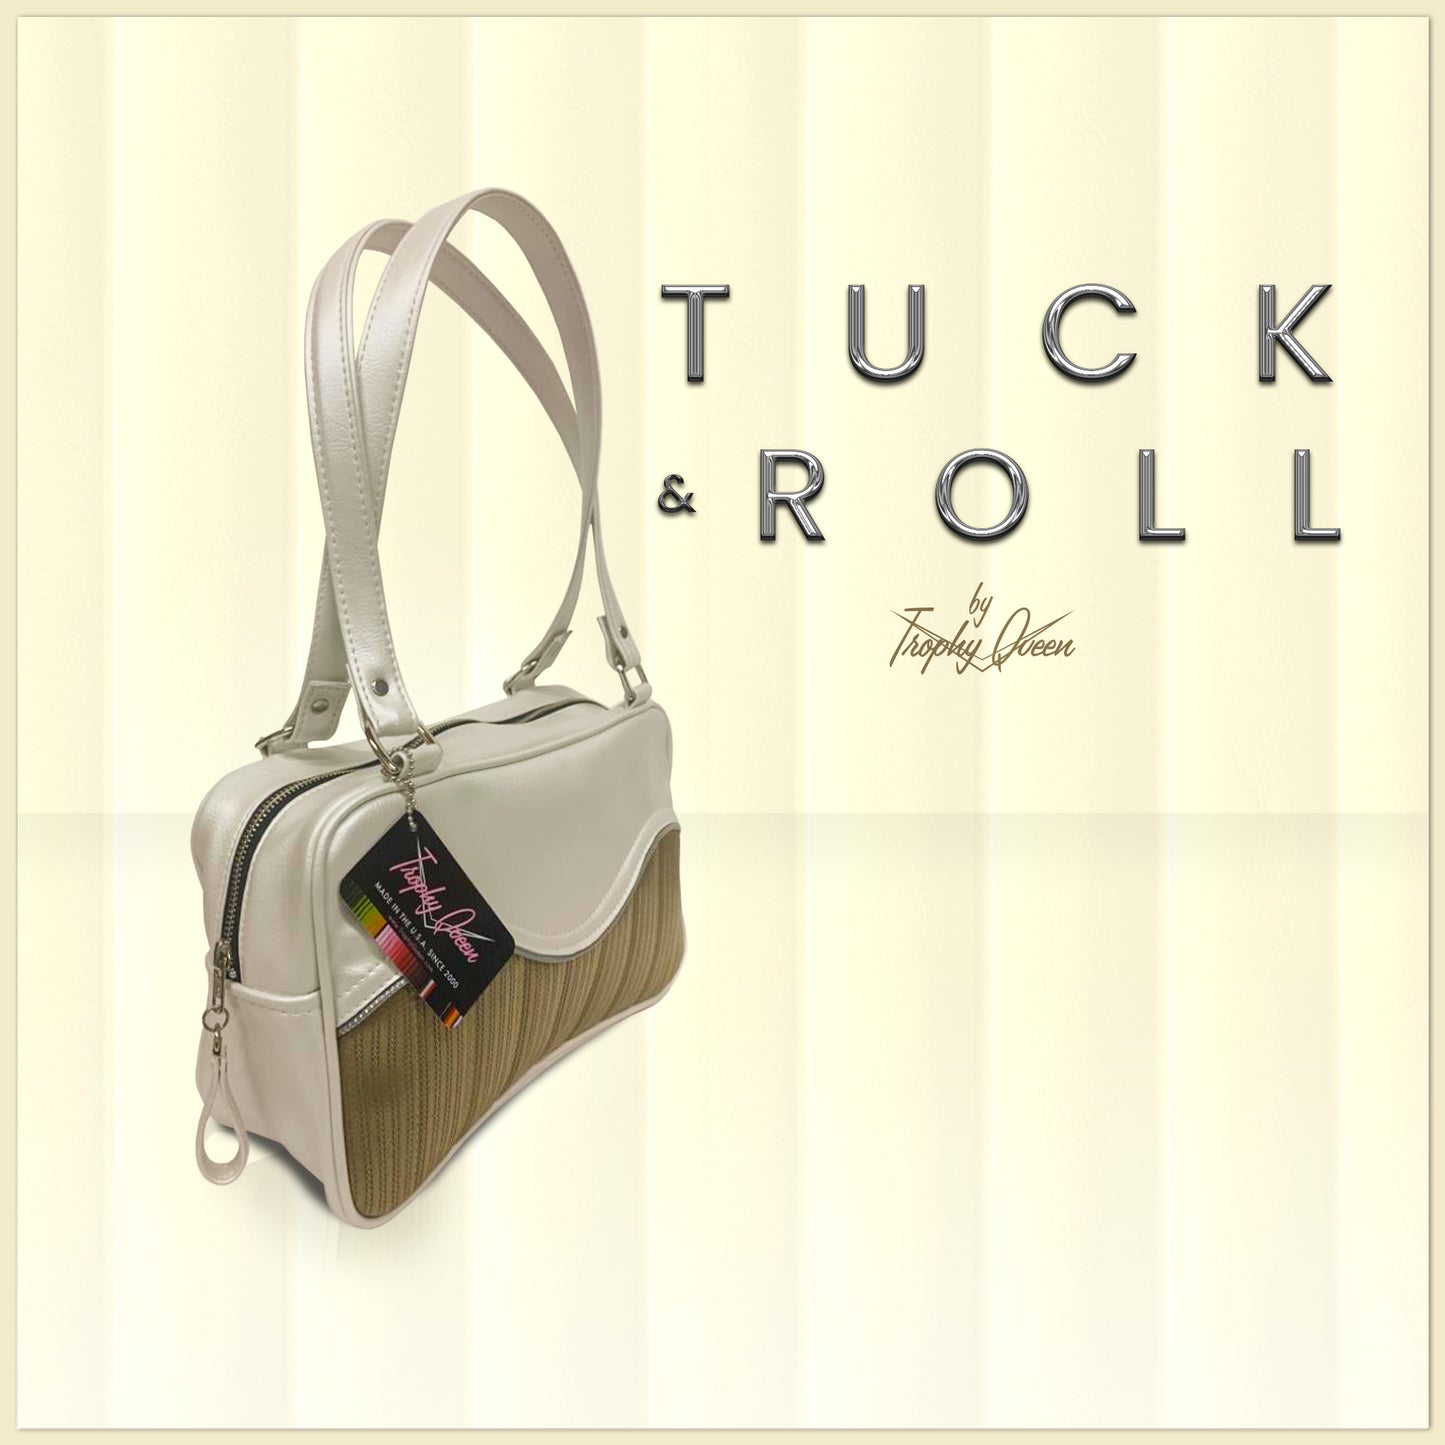 Tuck & Roll Features: Handcrafted in California Dimensions: 13" x 6" x 4" 21" Straps (Approx.) with Nickel Hardware Comes with an Extra Set of Replacement Straps! Inside Zipper Pocket (With Serial Number Inside) Inside Open Divided Pocket Inside Trophy Queen Label Vinyl Zipper Pull Nickel Feet Ships from California Made to Order - Please Allow 3-4 Weeks to Ship